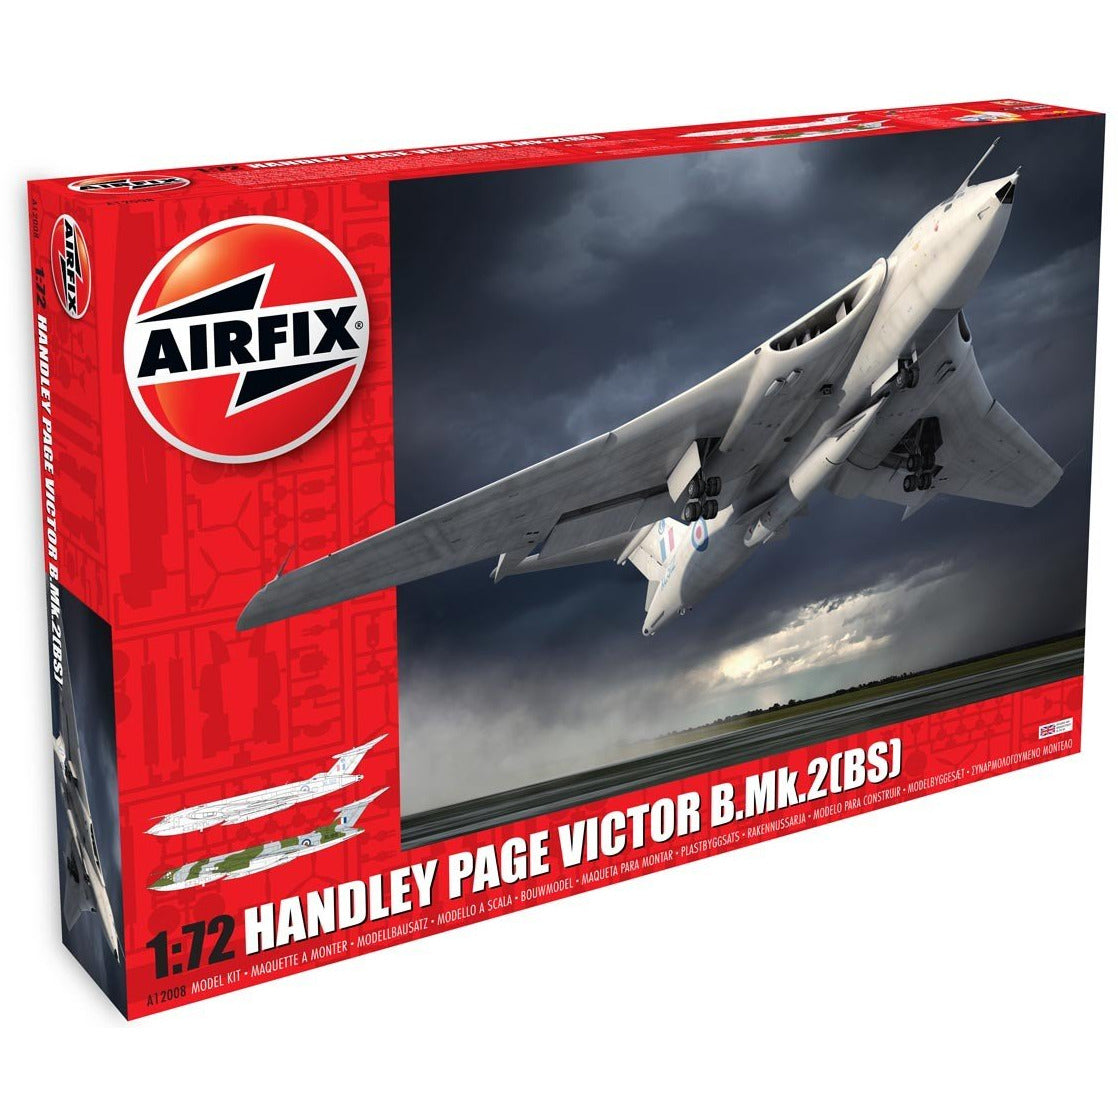 Handley Page Victor B.MK2(BS) 1/72 by Airfix